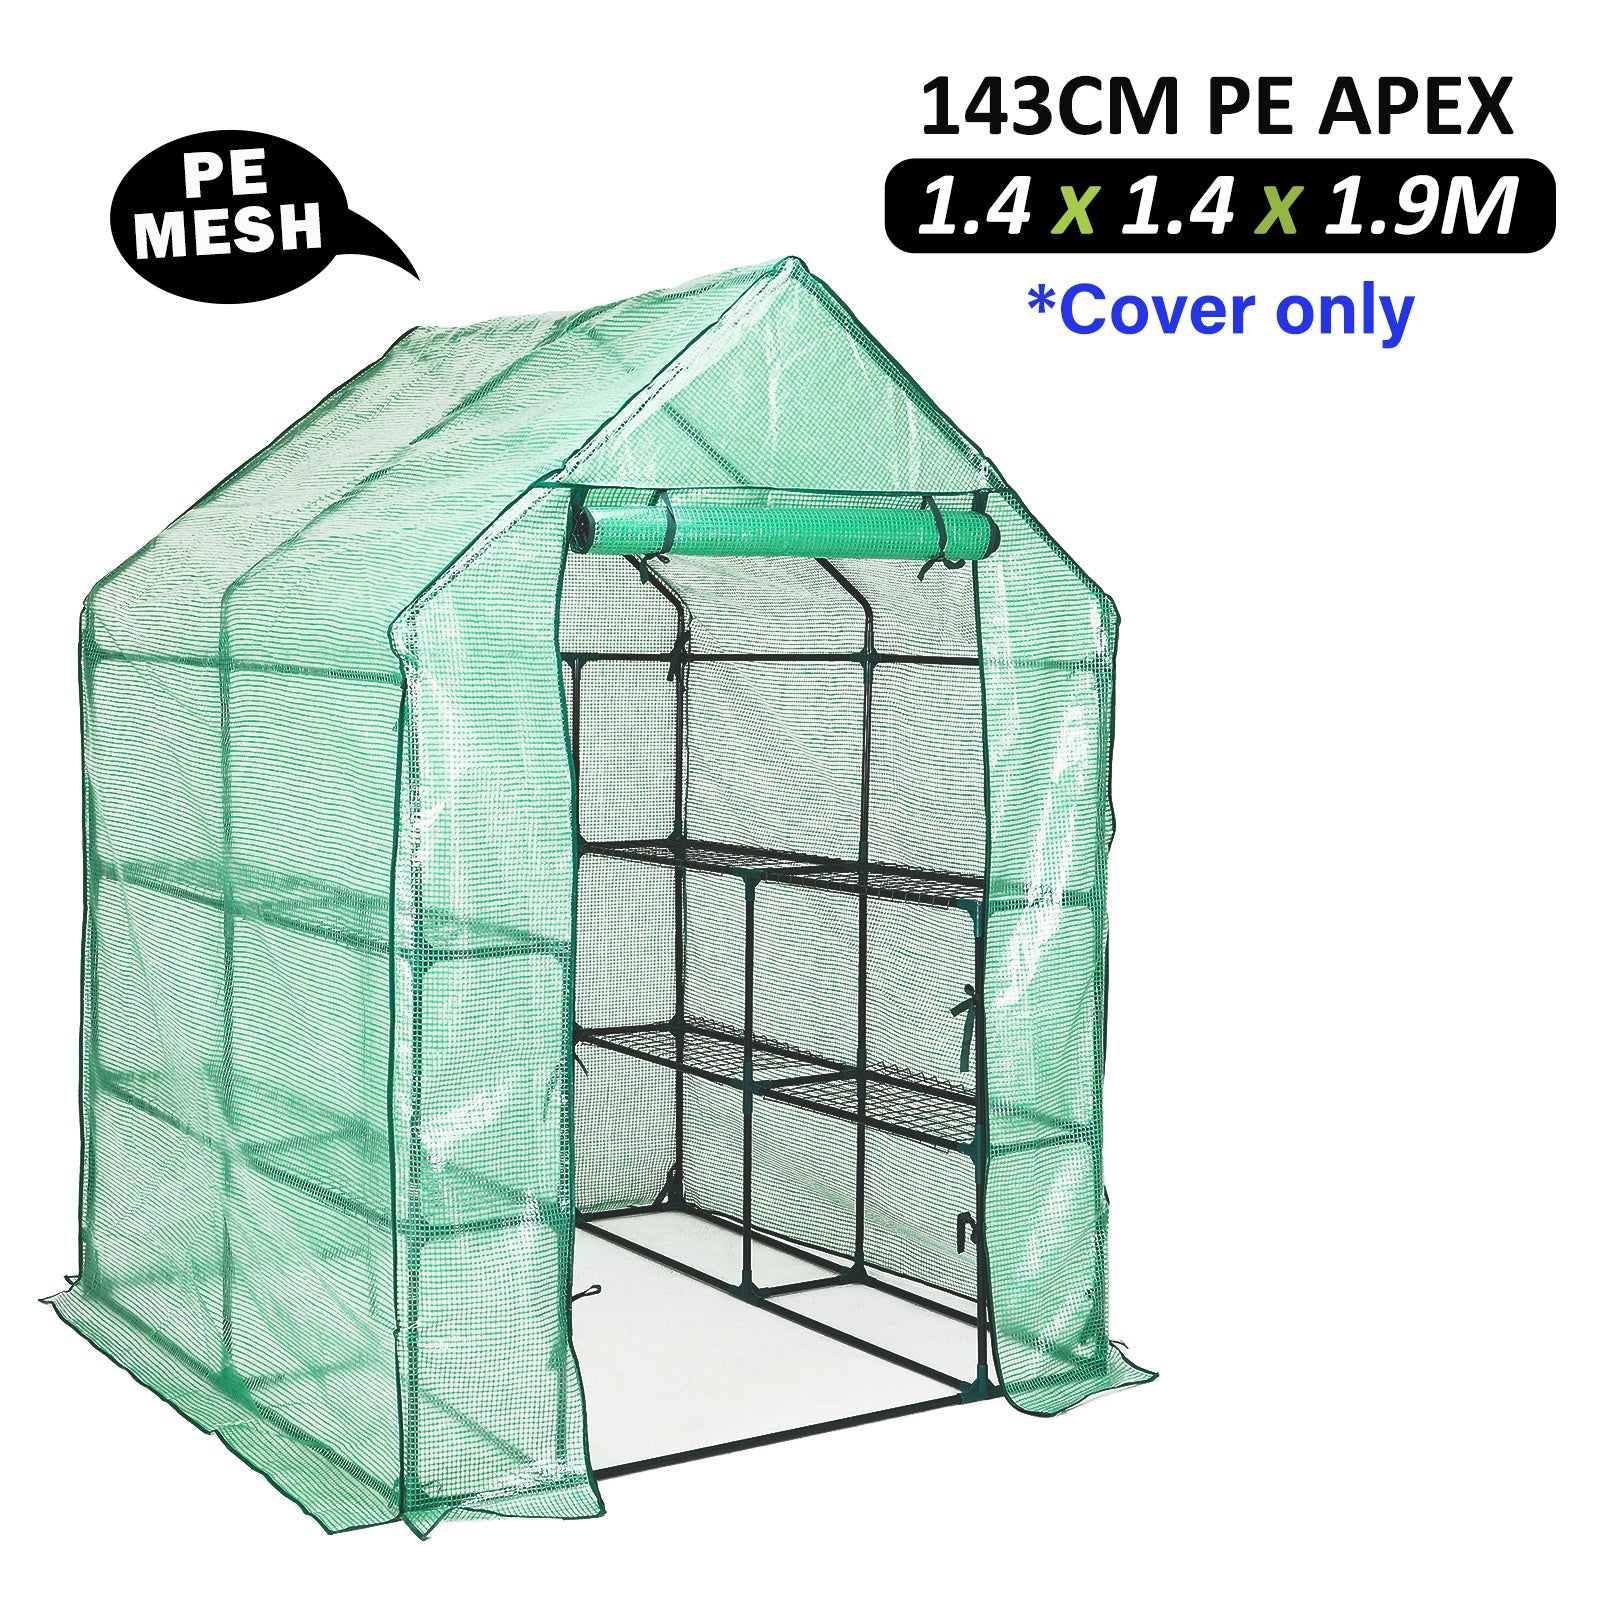 Home Ready Apex 143cm Garden Greenhouse Shed PE Cover Only - image4